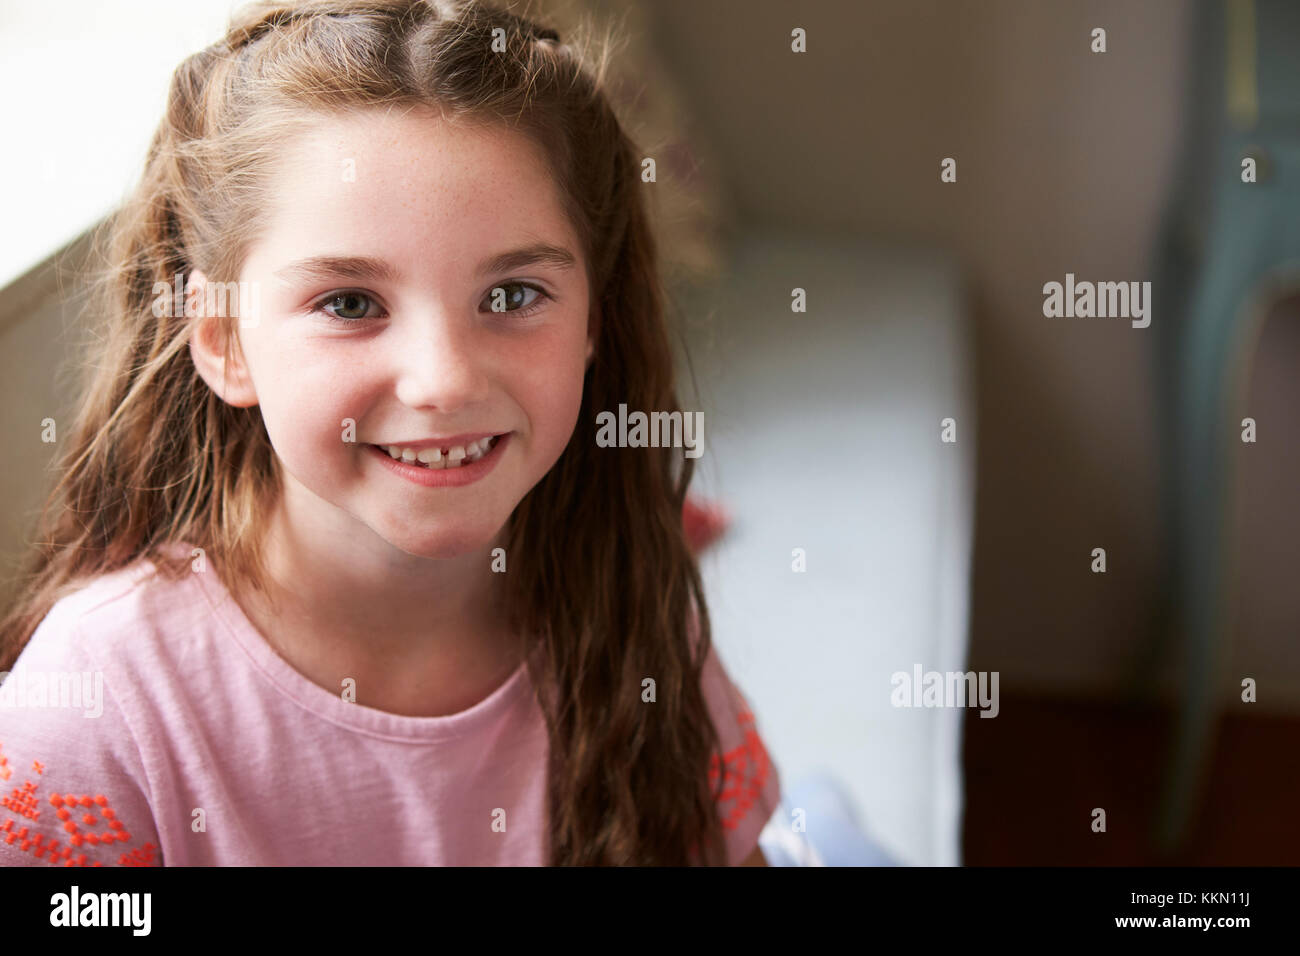 Portrait Of Smiling Young Girl Sitting On Window Seat At Home Stock Photo